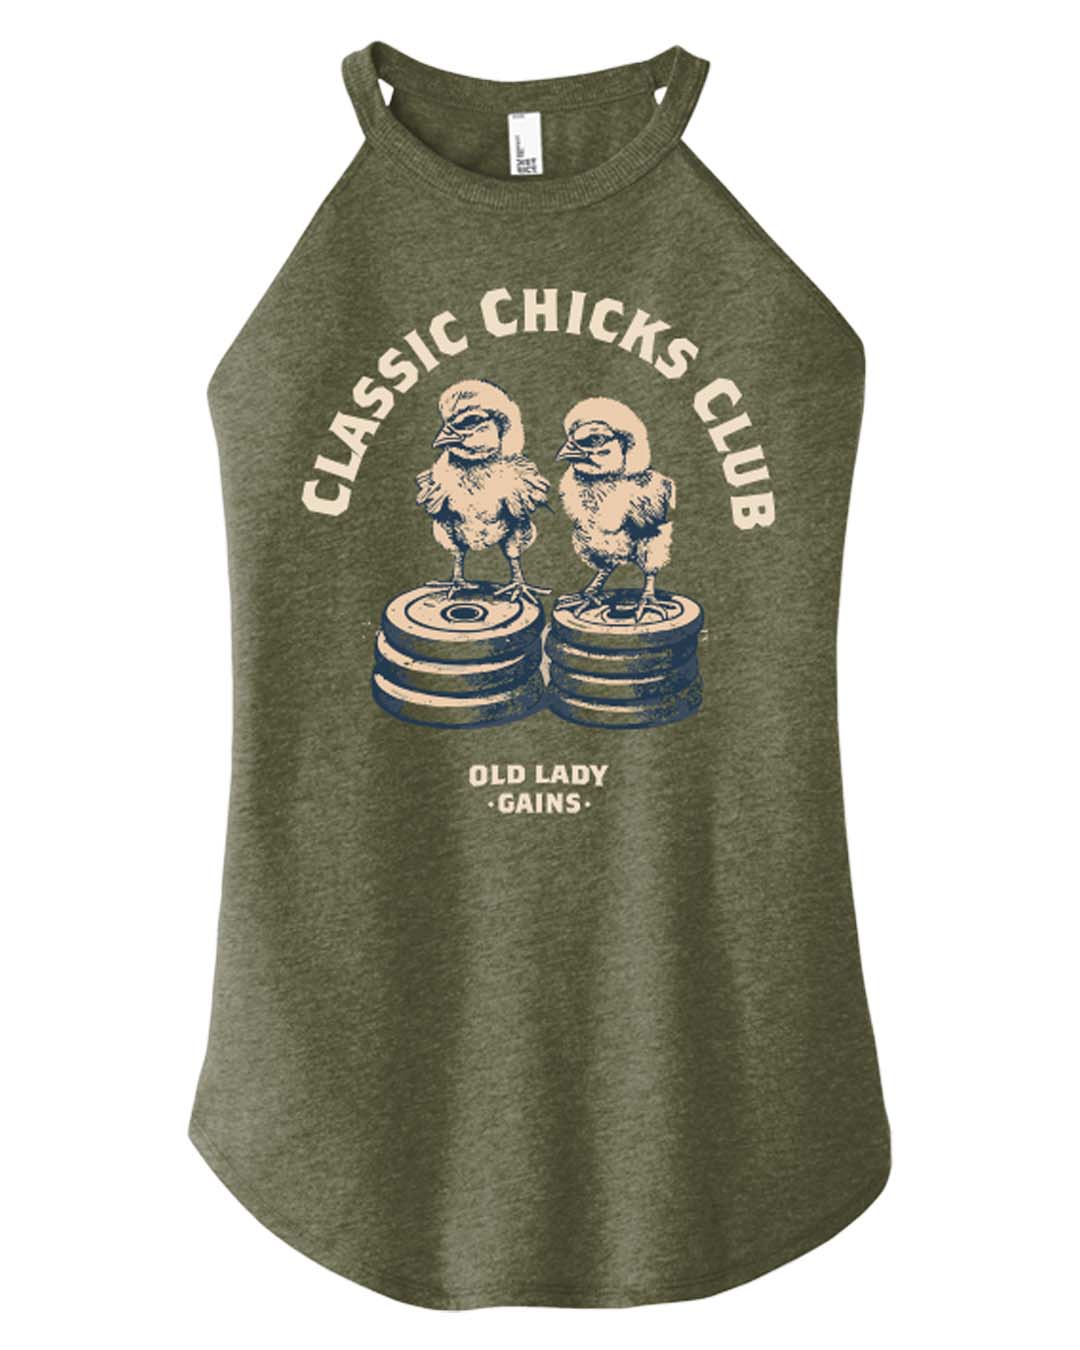 Classic Chicks Halter Tank – Old Lady Gains